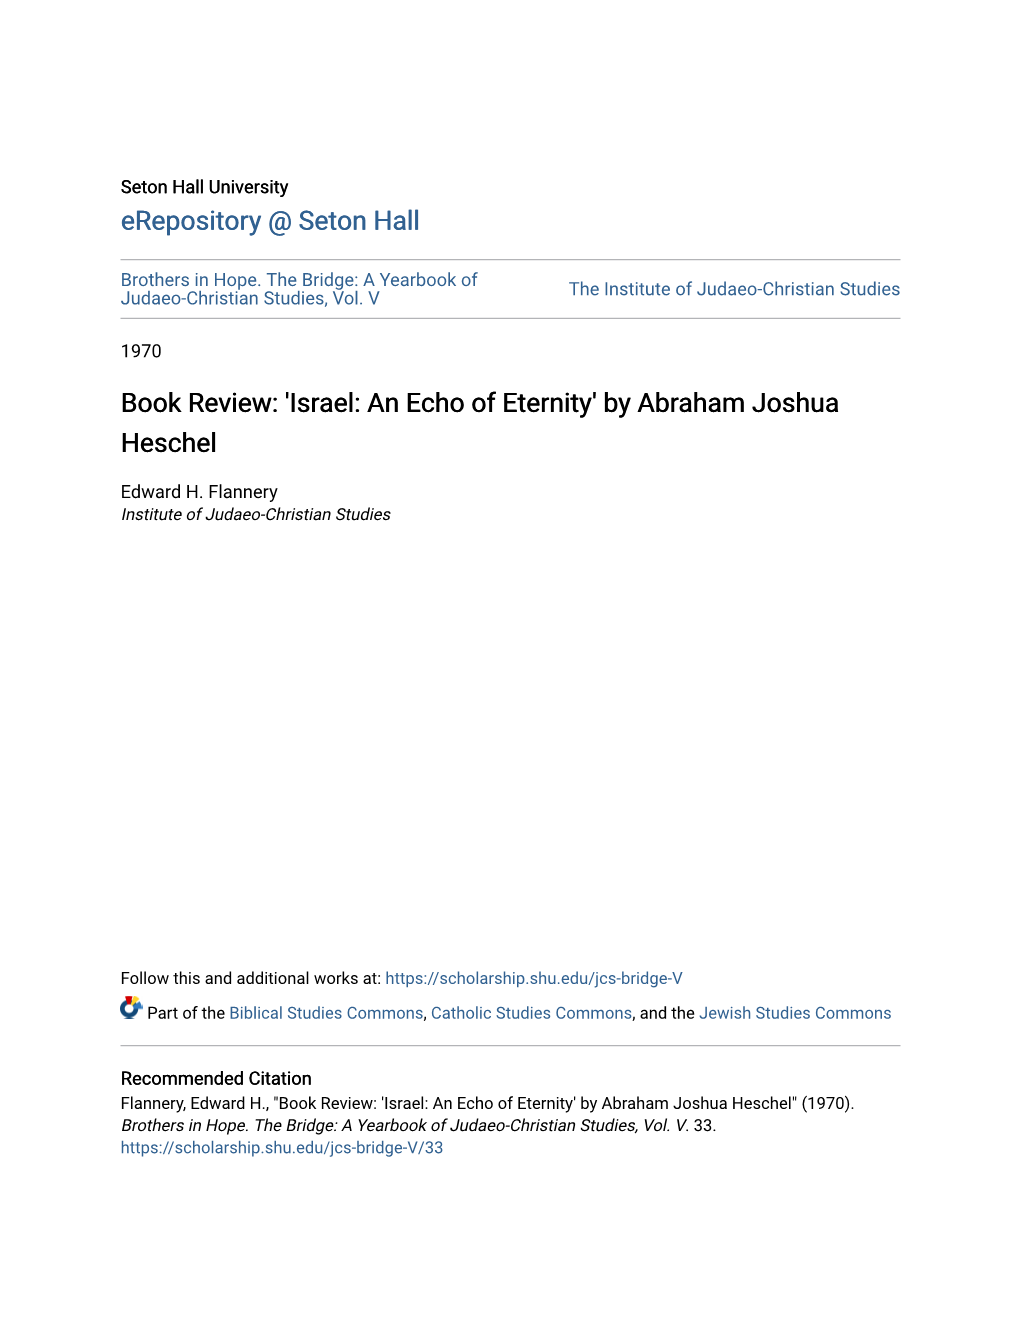 Book Review: 'Israel: an Echo of Eternity' by Abraham Joshua Heschel